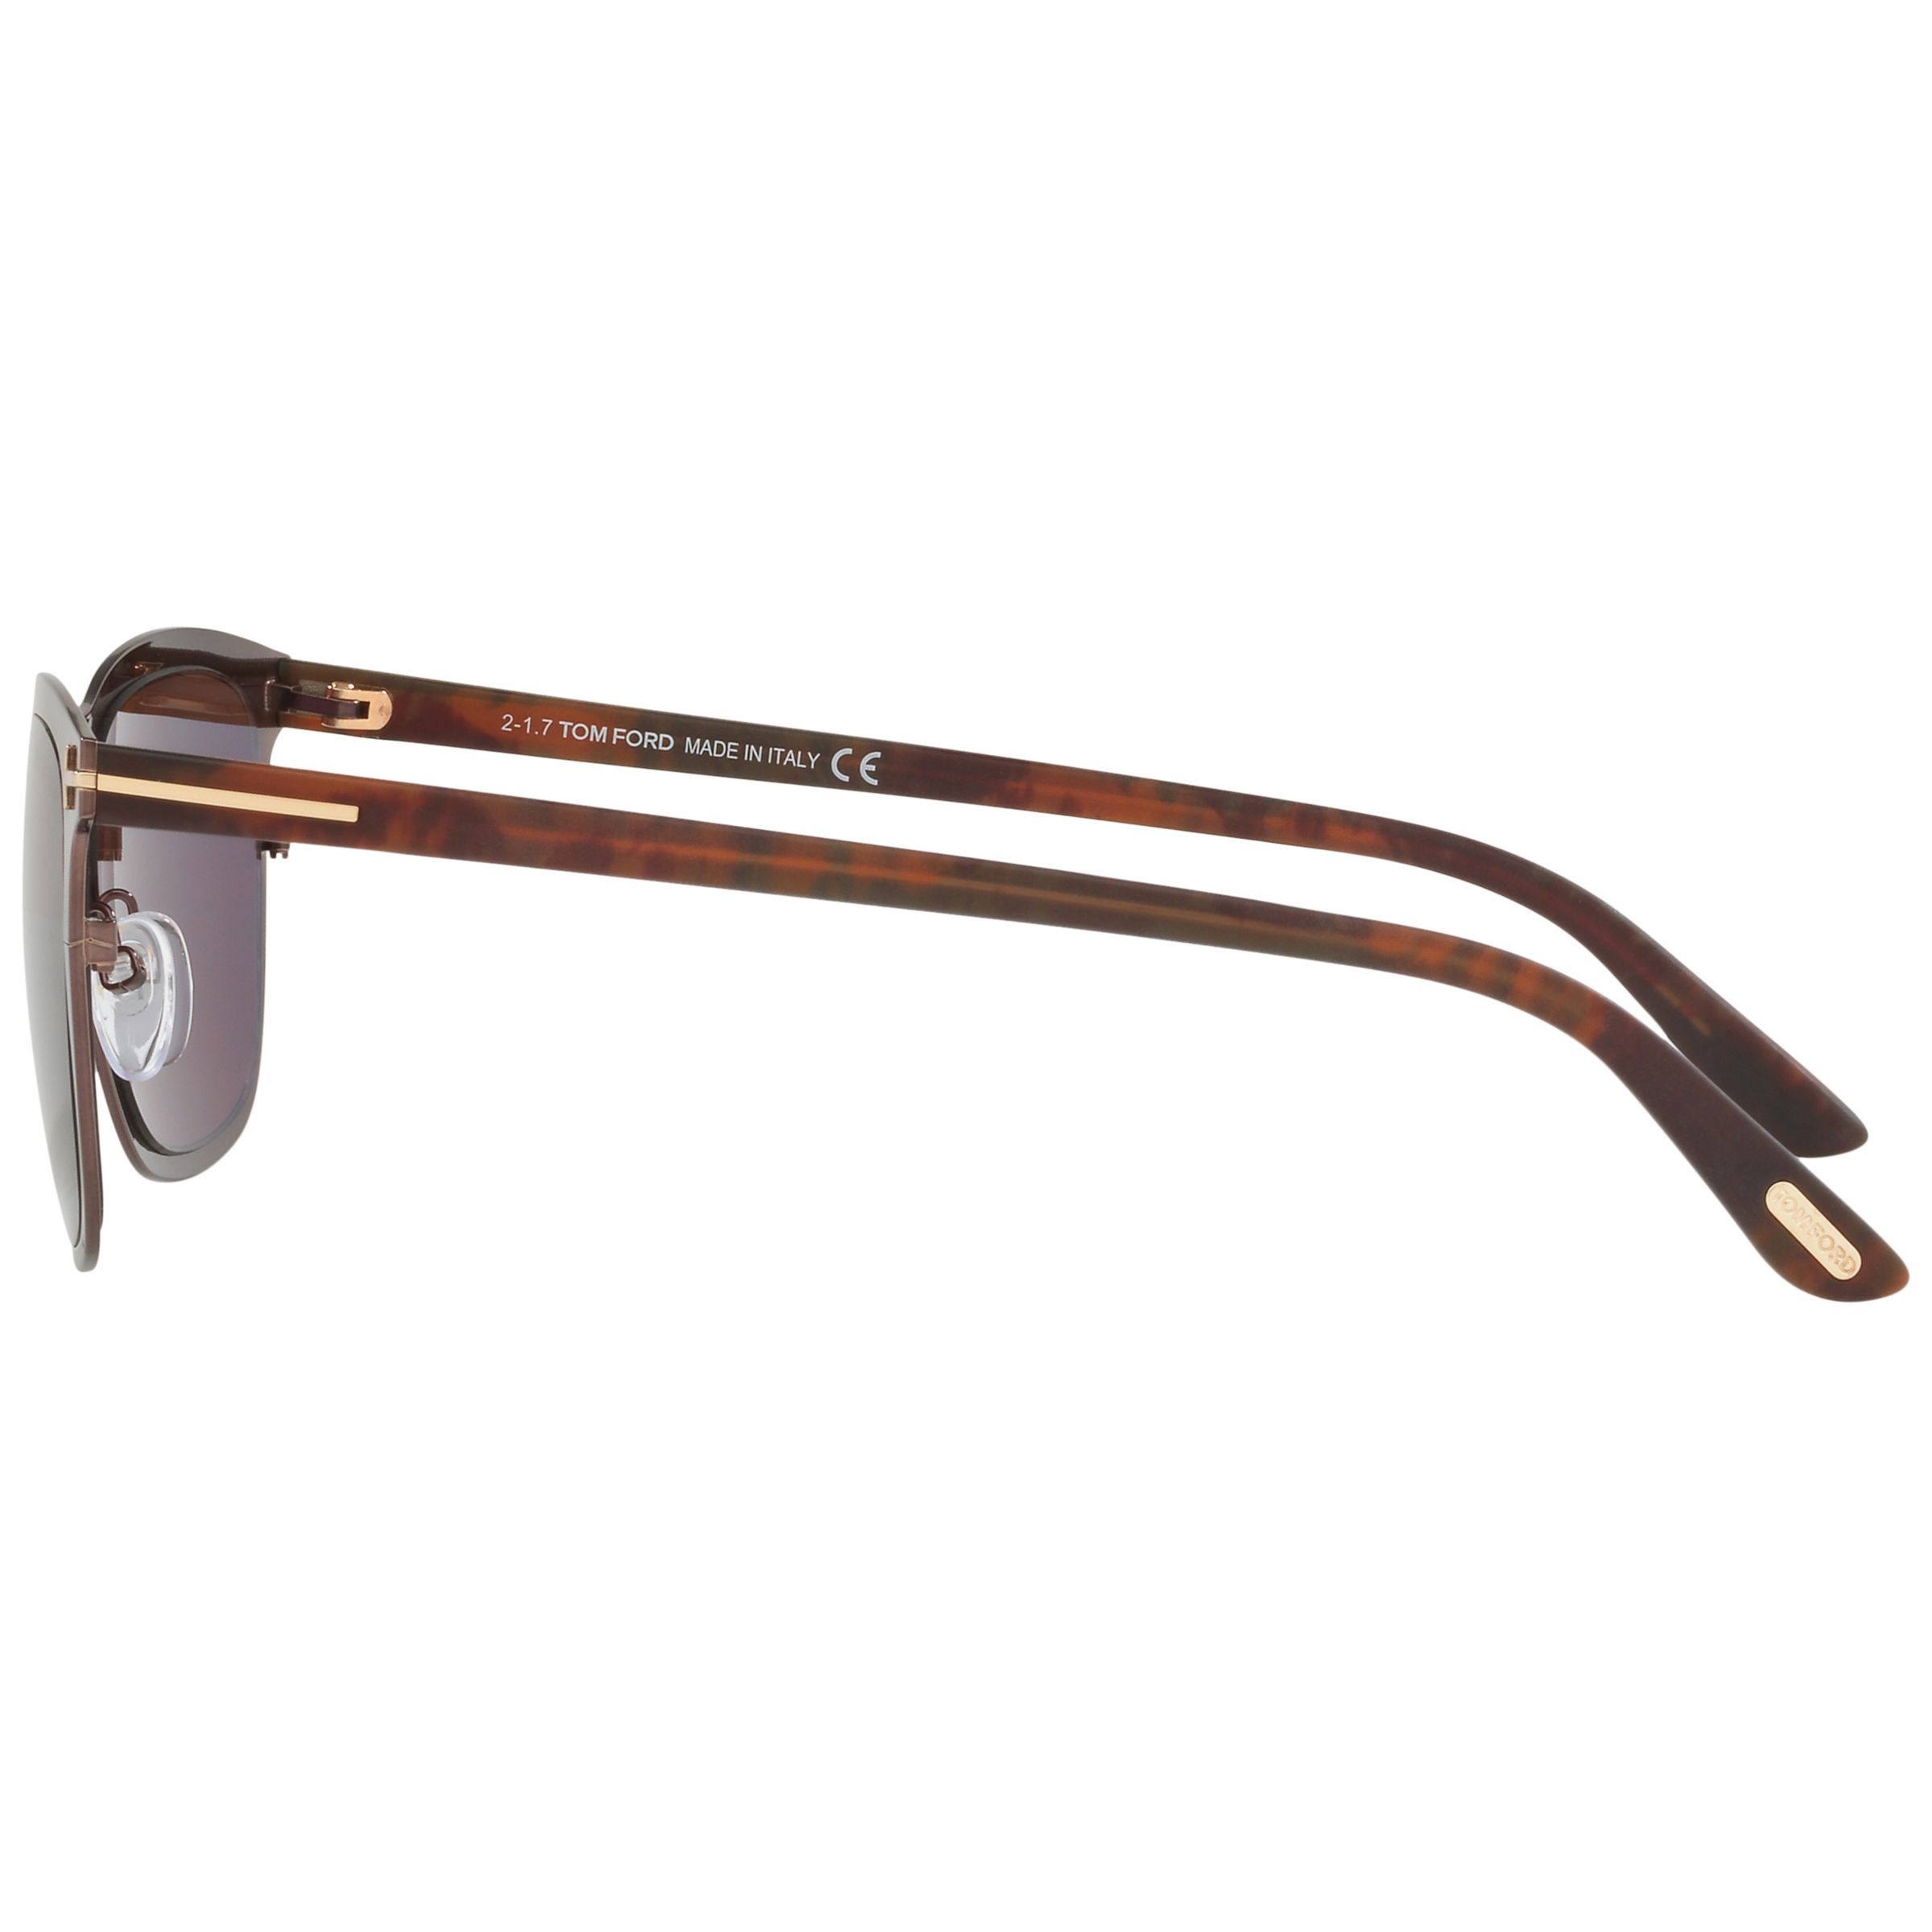 Buy TOM FORD FT0526 Alasdhair Square Sunglasses Online at johnlewis.com